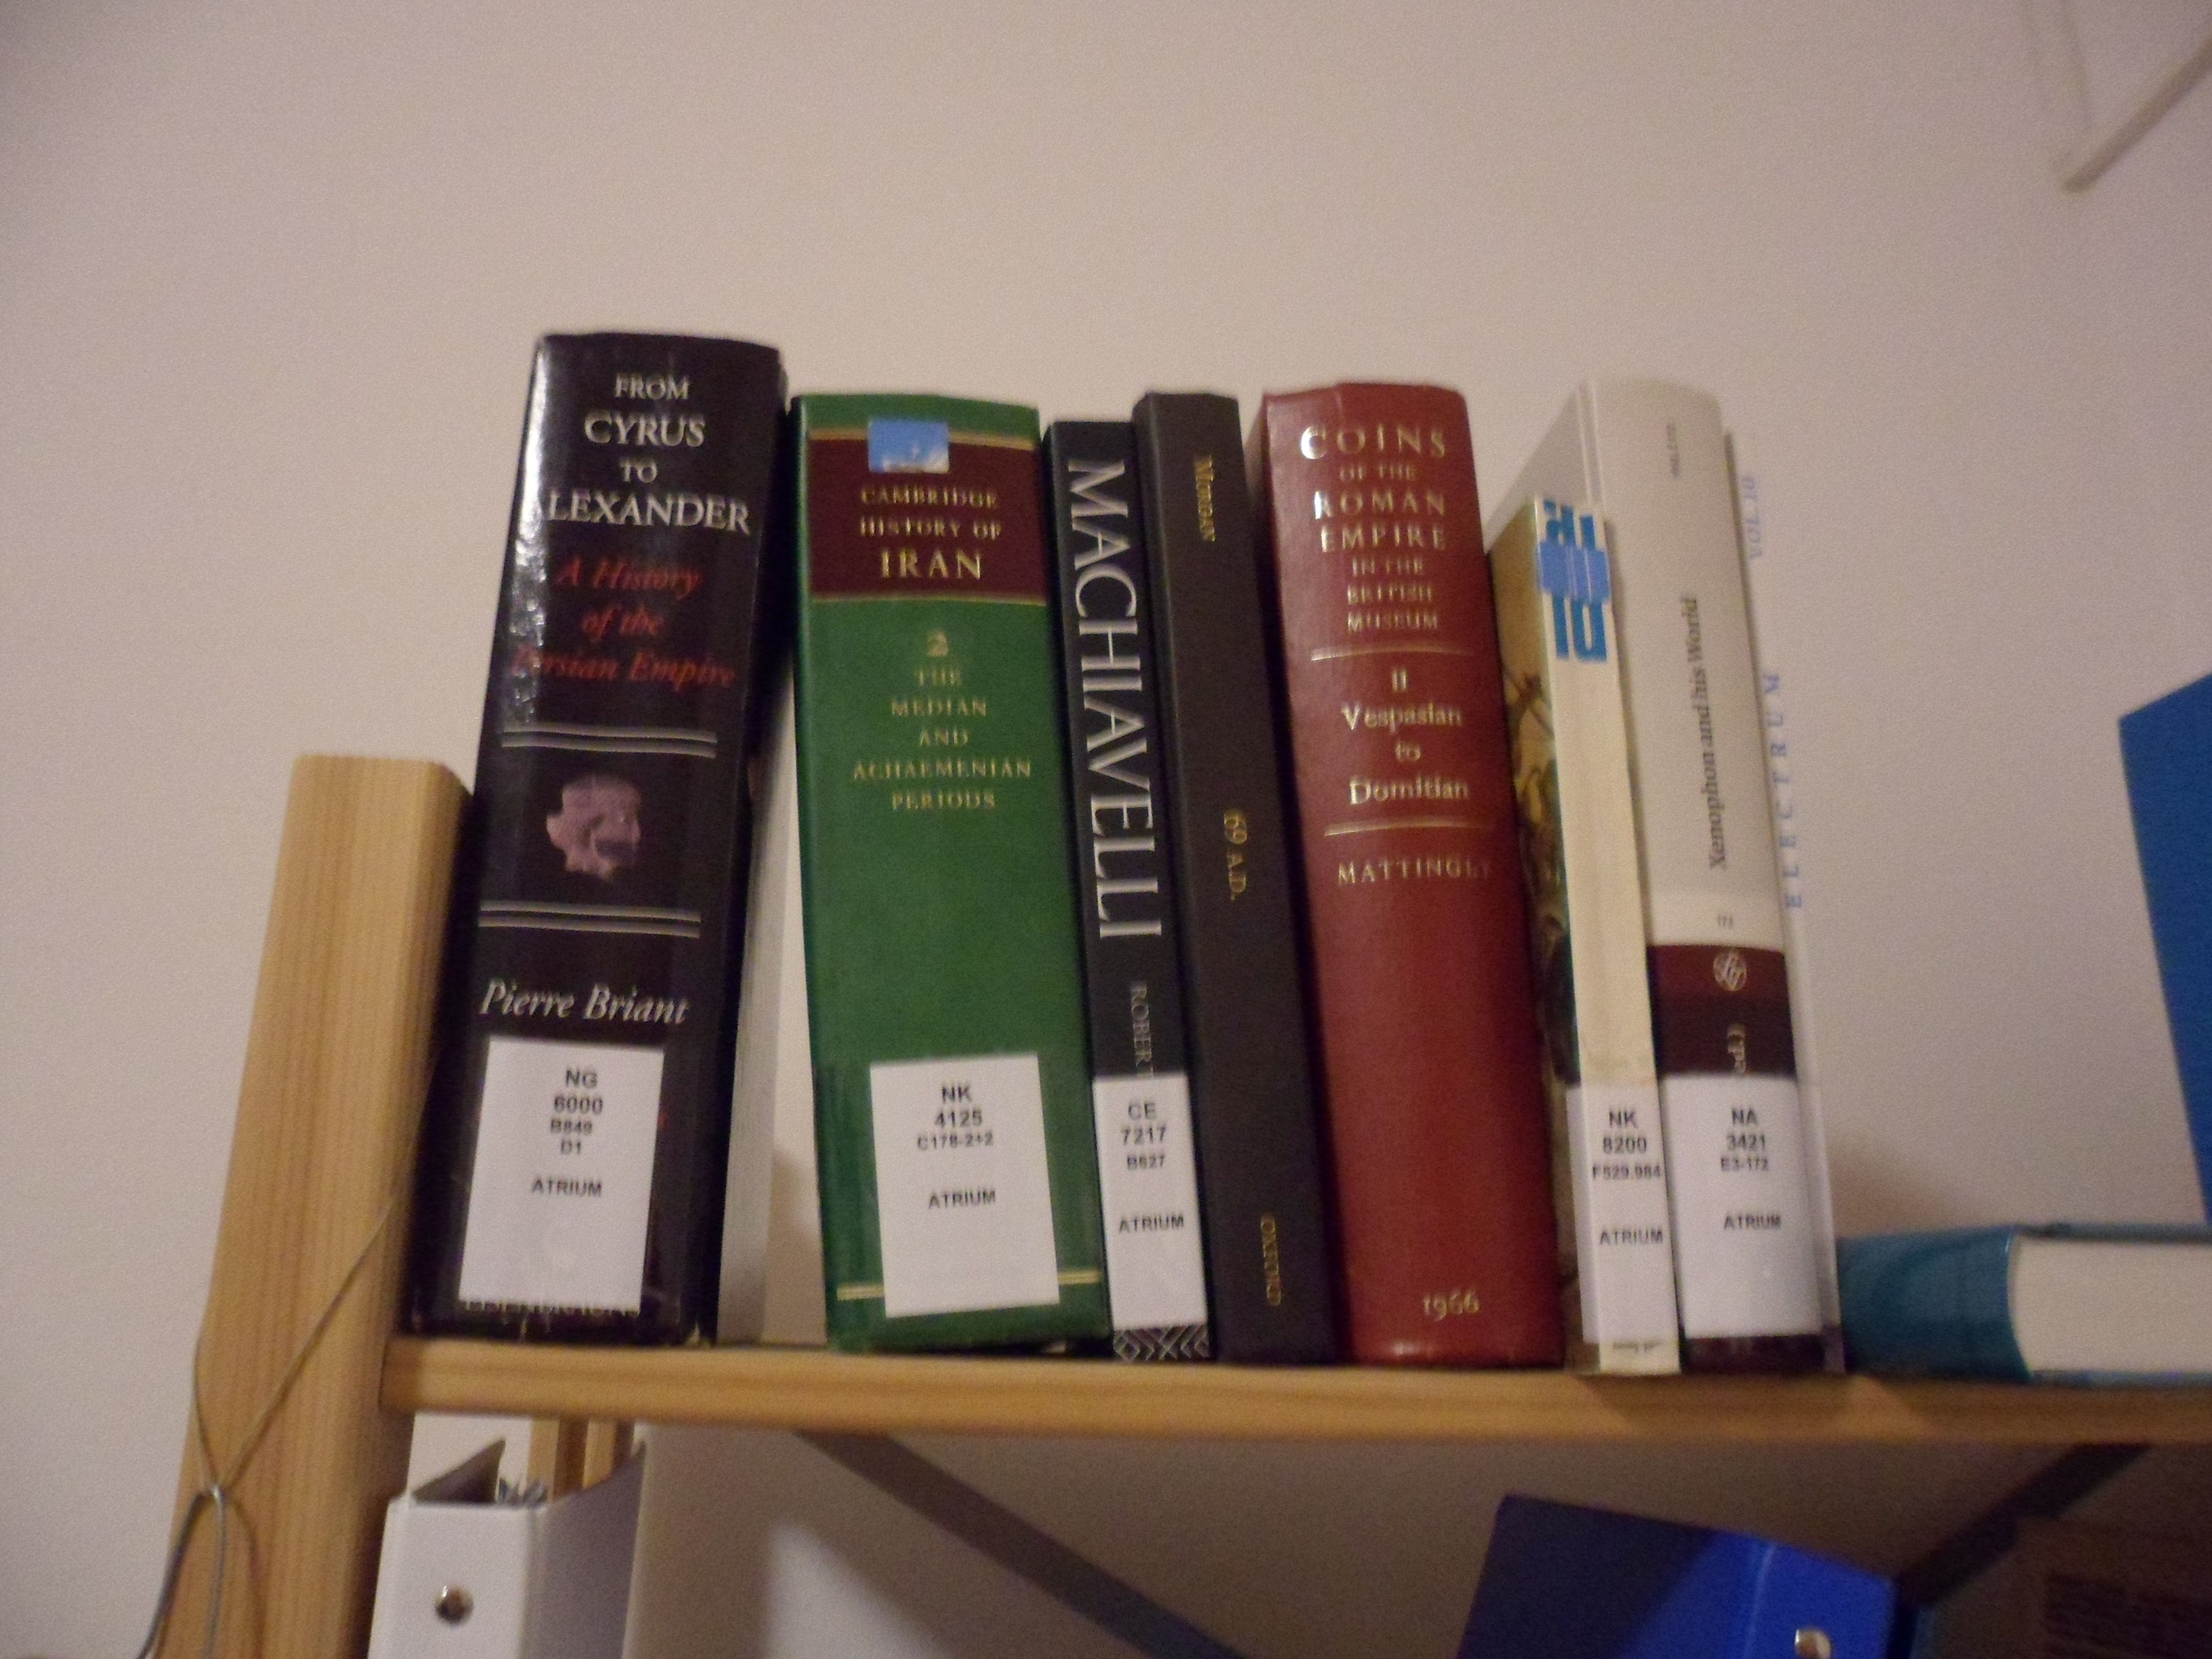 Some books on a shelf including Pierre Briant's History of the Persian Empire and volume two of the Cambridge History of Iran